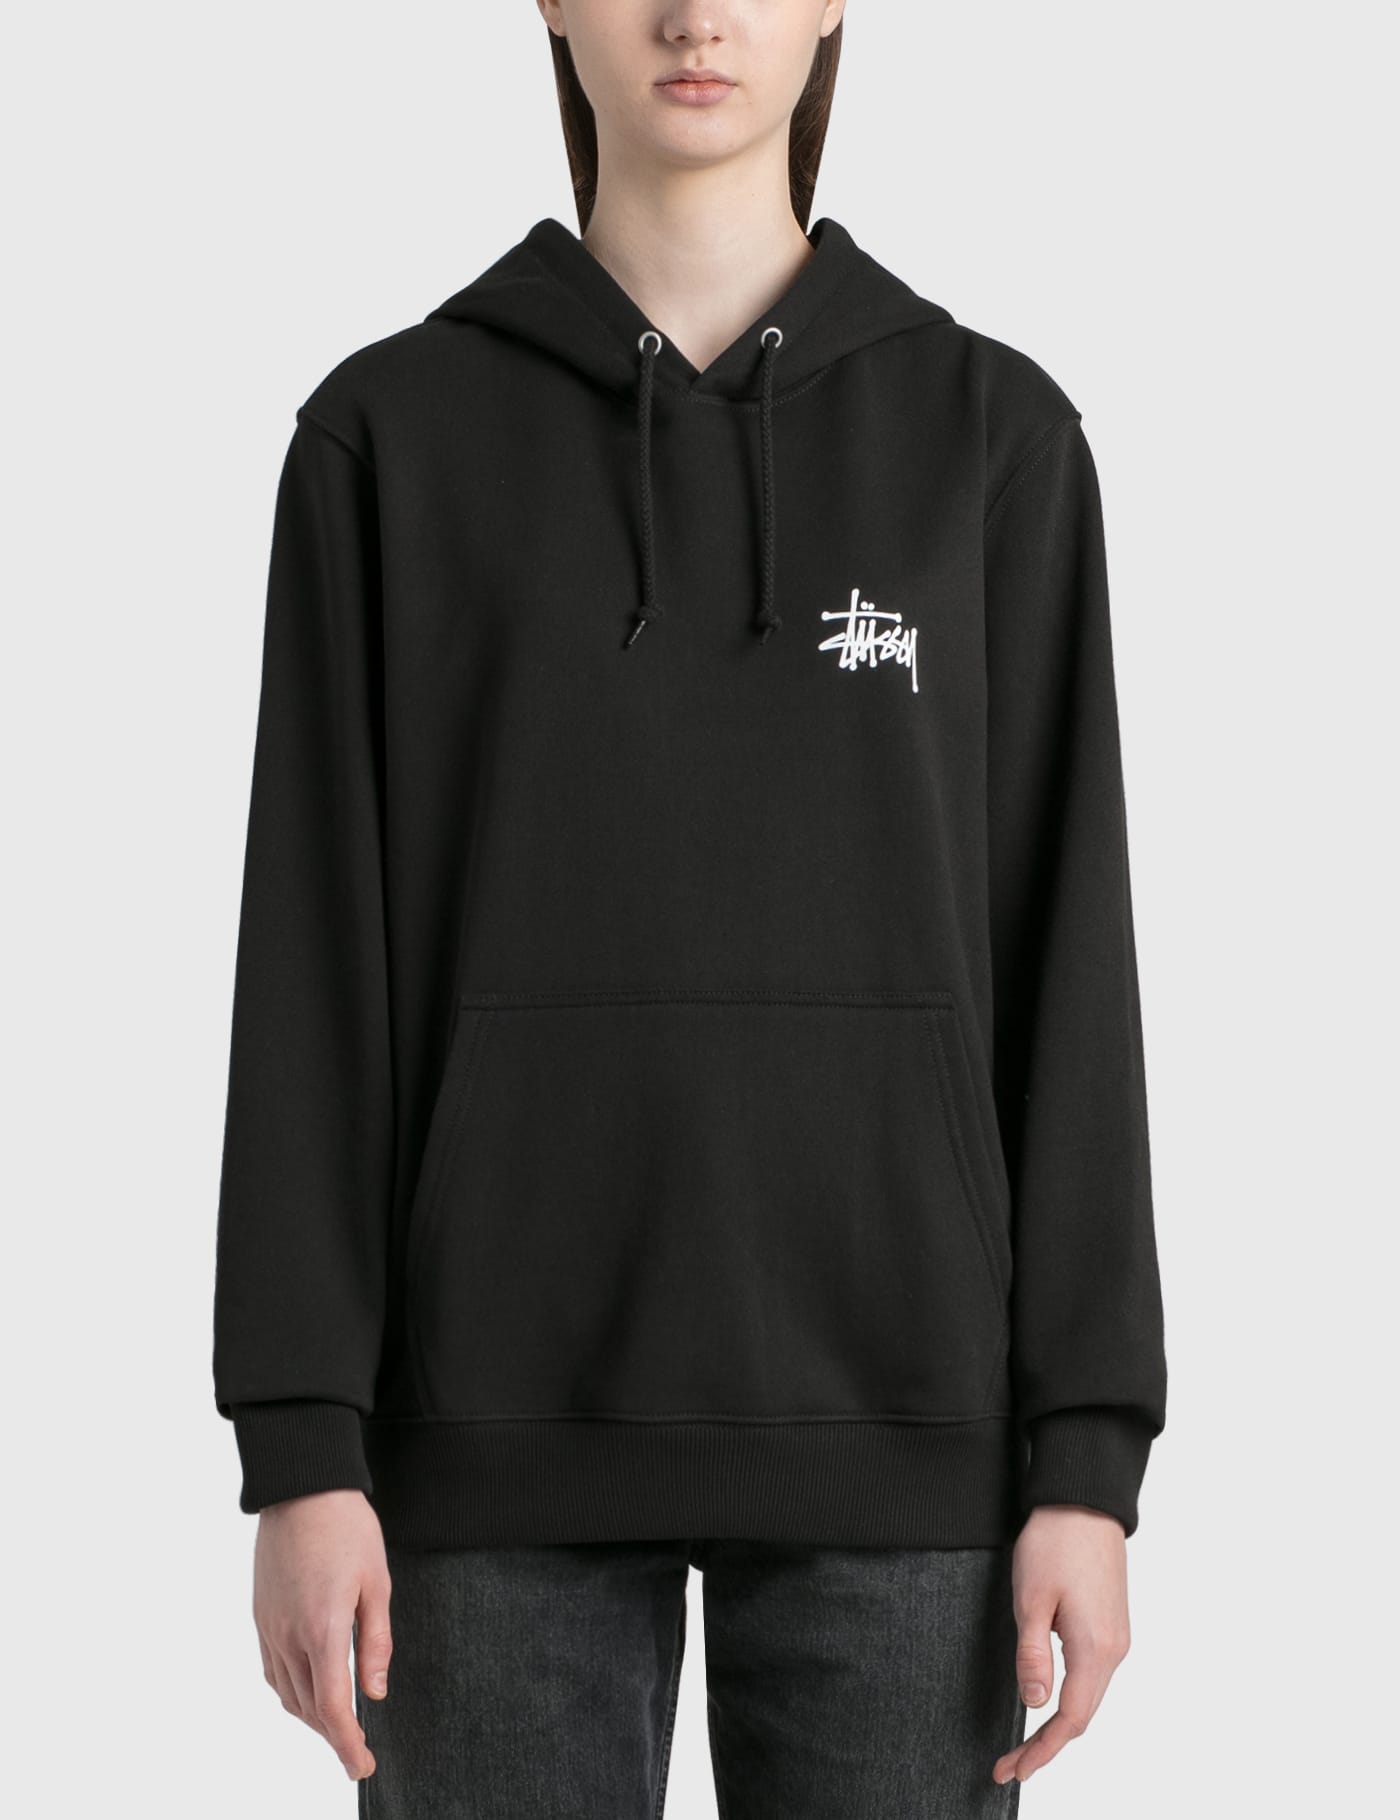 Stüssy - Basic Stussy Hoodie | HBX - Globally Curated Fashion and